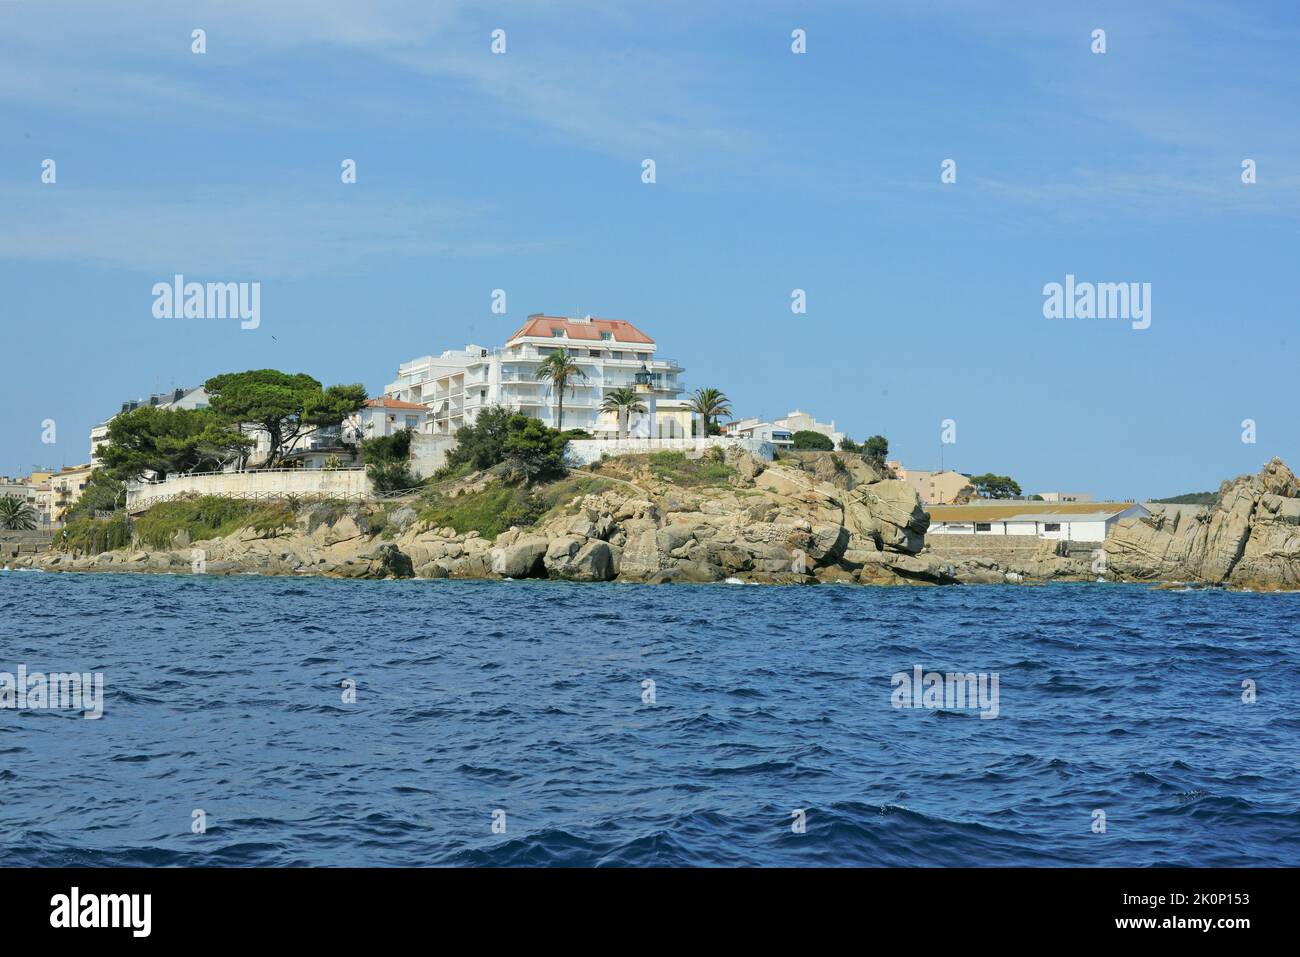 Panoramic view of the Palamós lighthouse located on the Costa Brava province of Gerona, Catalonia, Spain Stock Photo